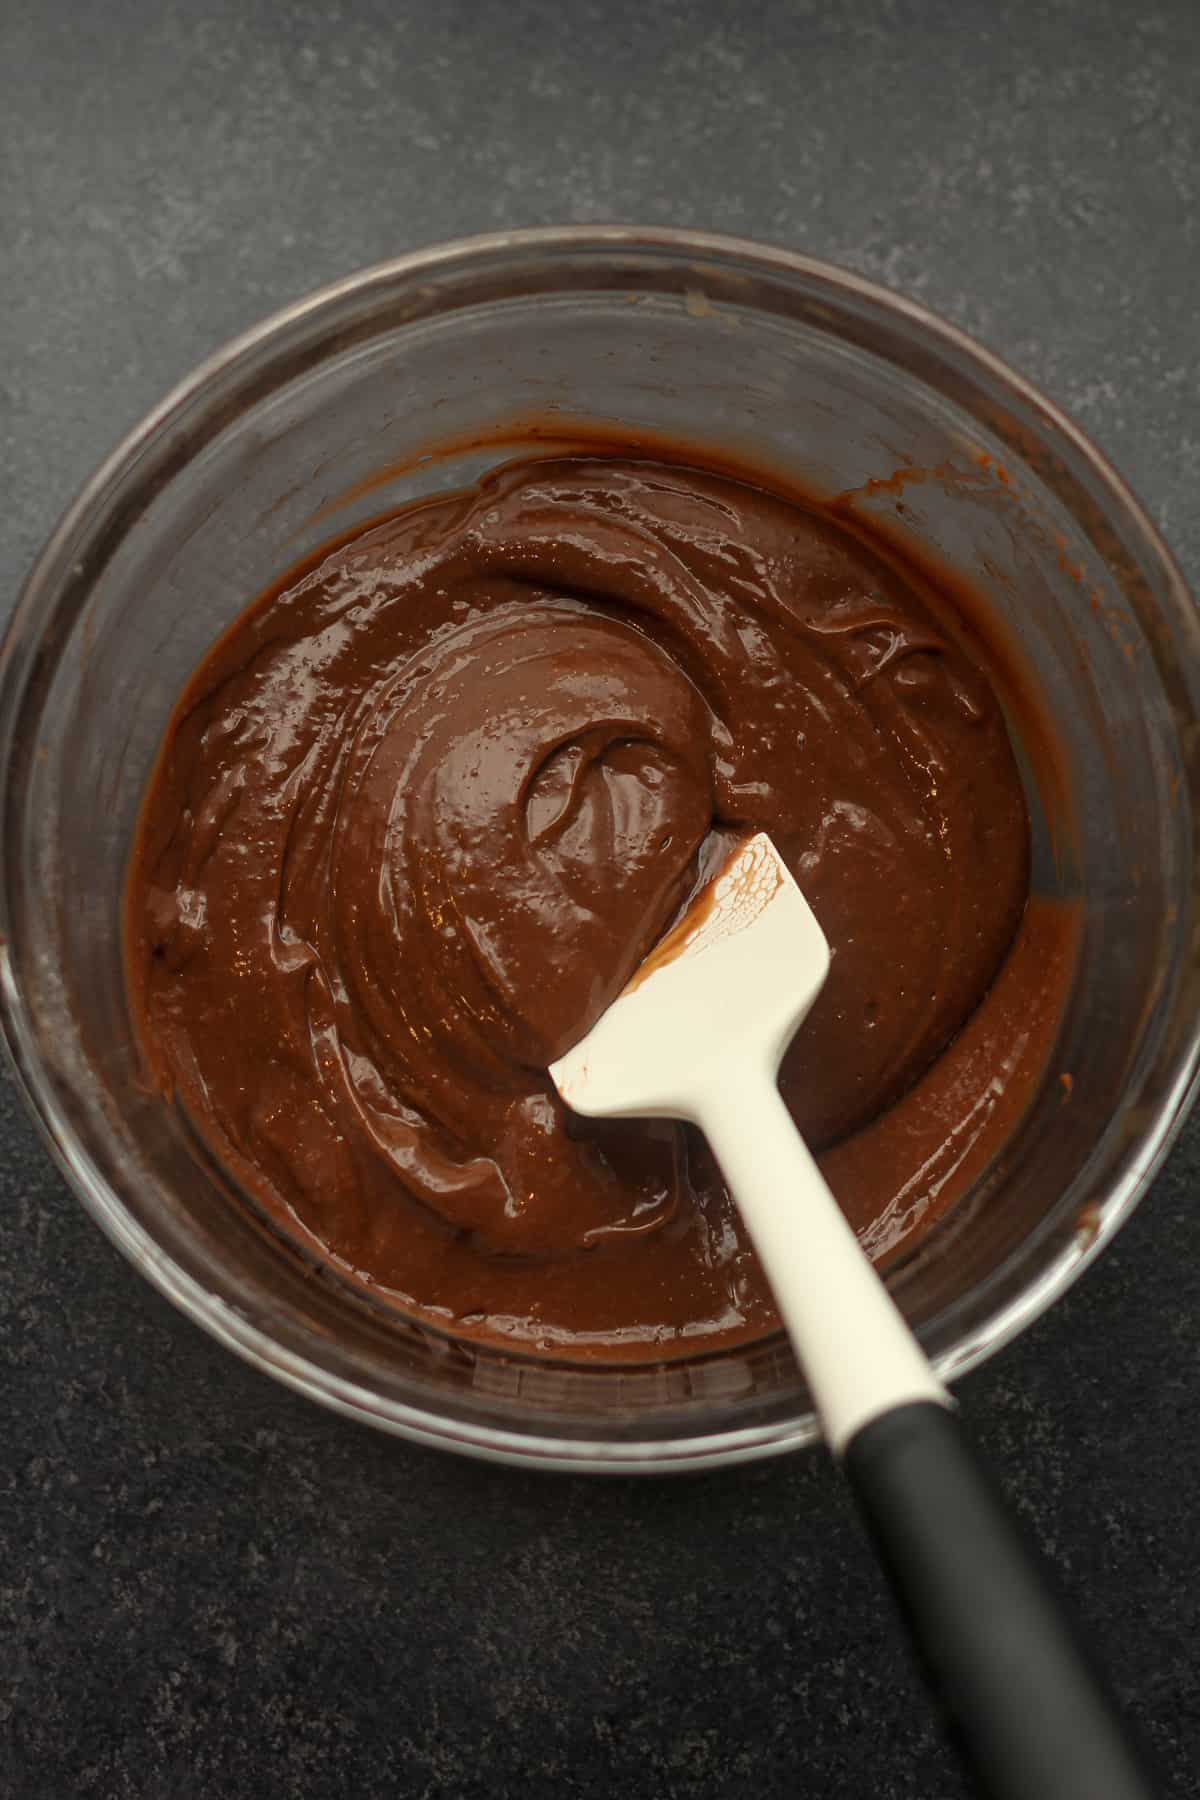 A bowl of the chocolate pudding with a white spatula.